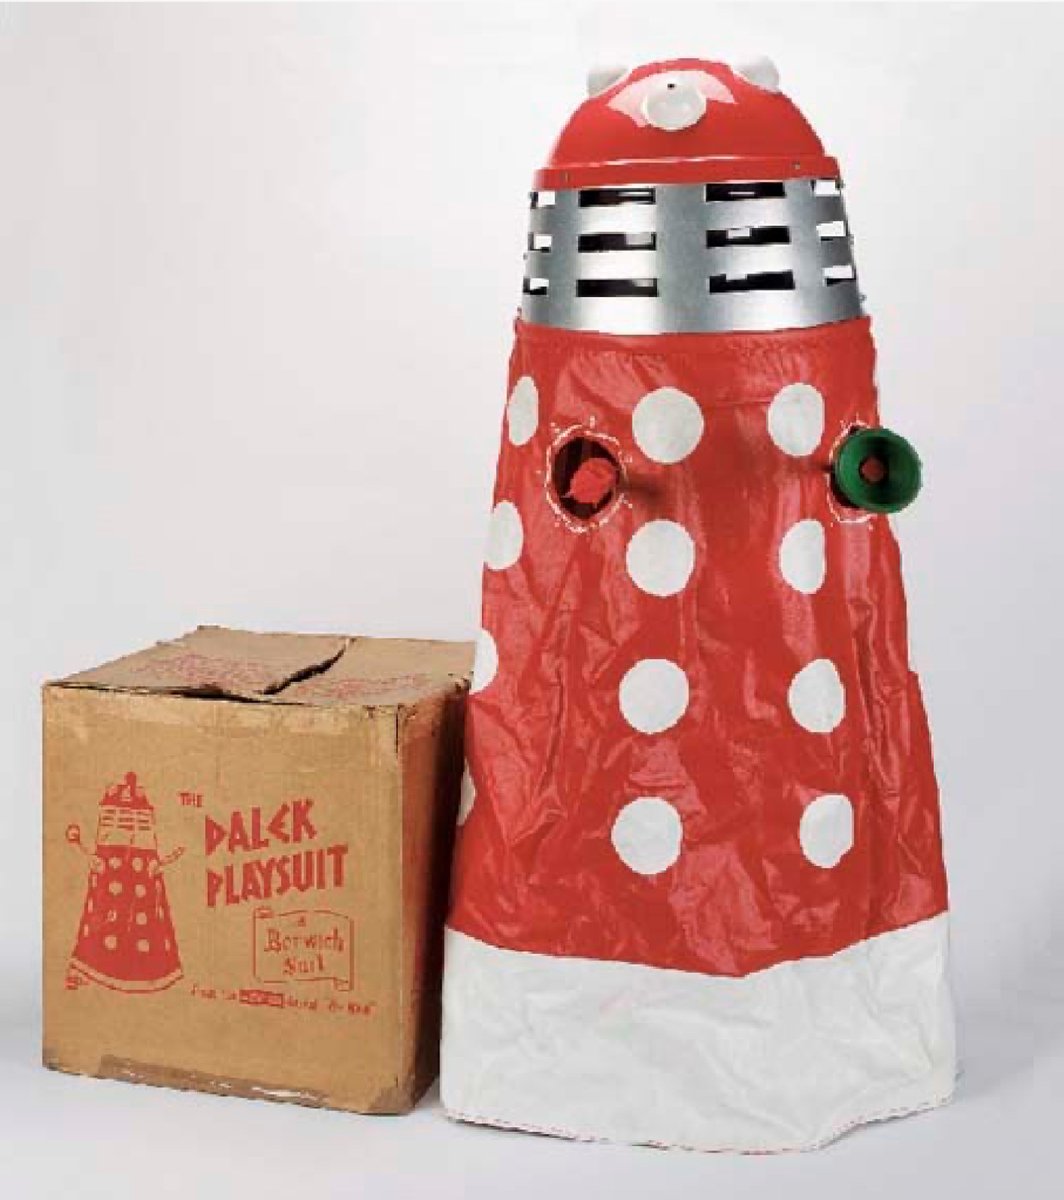 My most vivid memories of Dr Who are laughing at one of my younger brothers legging it and hiding behind the sofa whenever the music started up and us all being bought this Dalek suit. In my head we were about to get a Dalek you could sit in, we got a plastic hat and skirt😆🤣😆